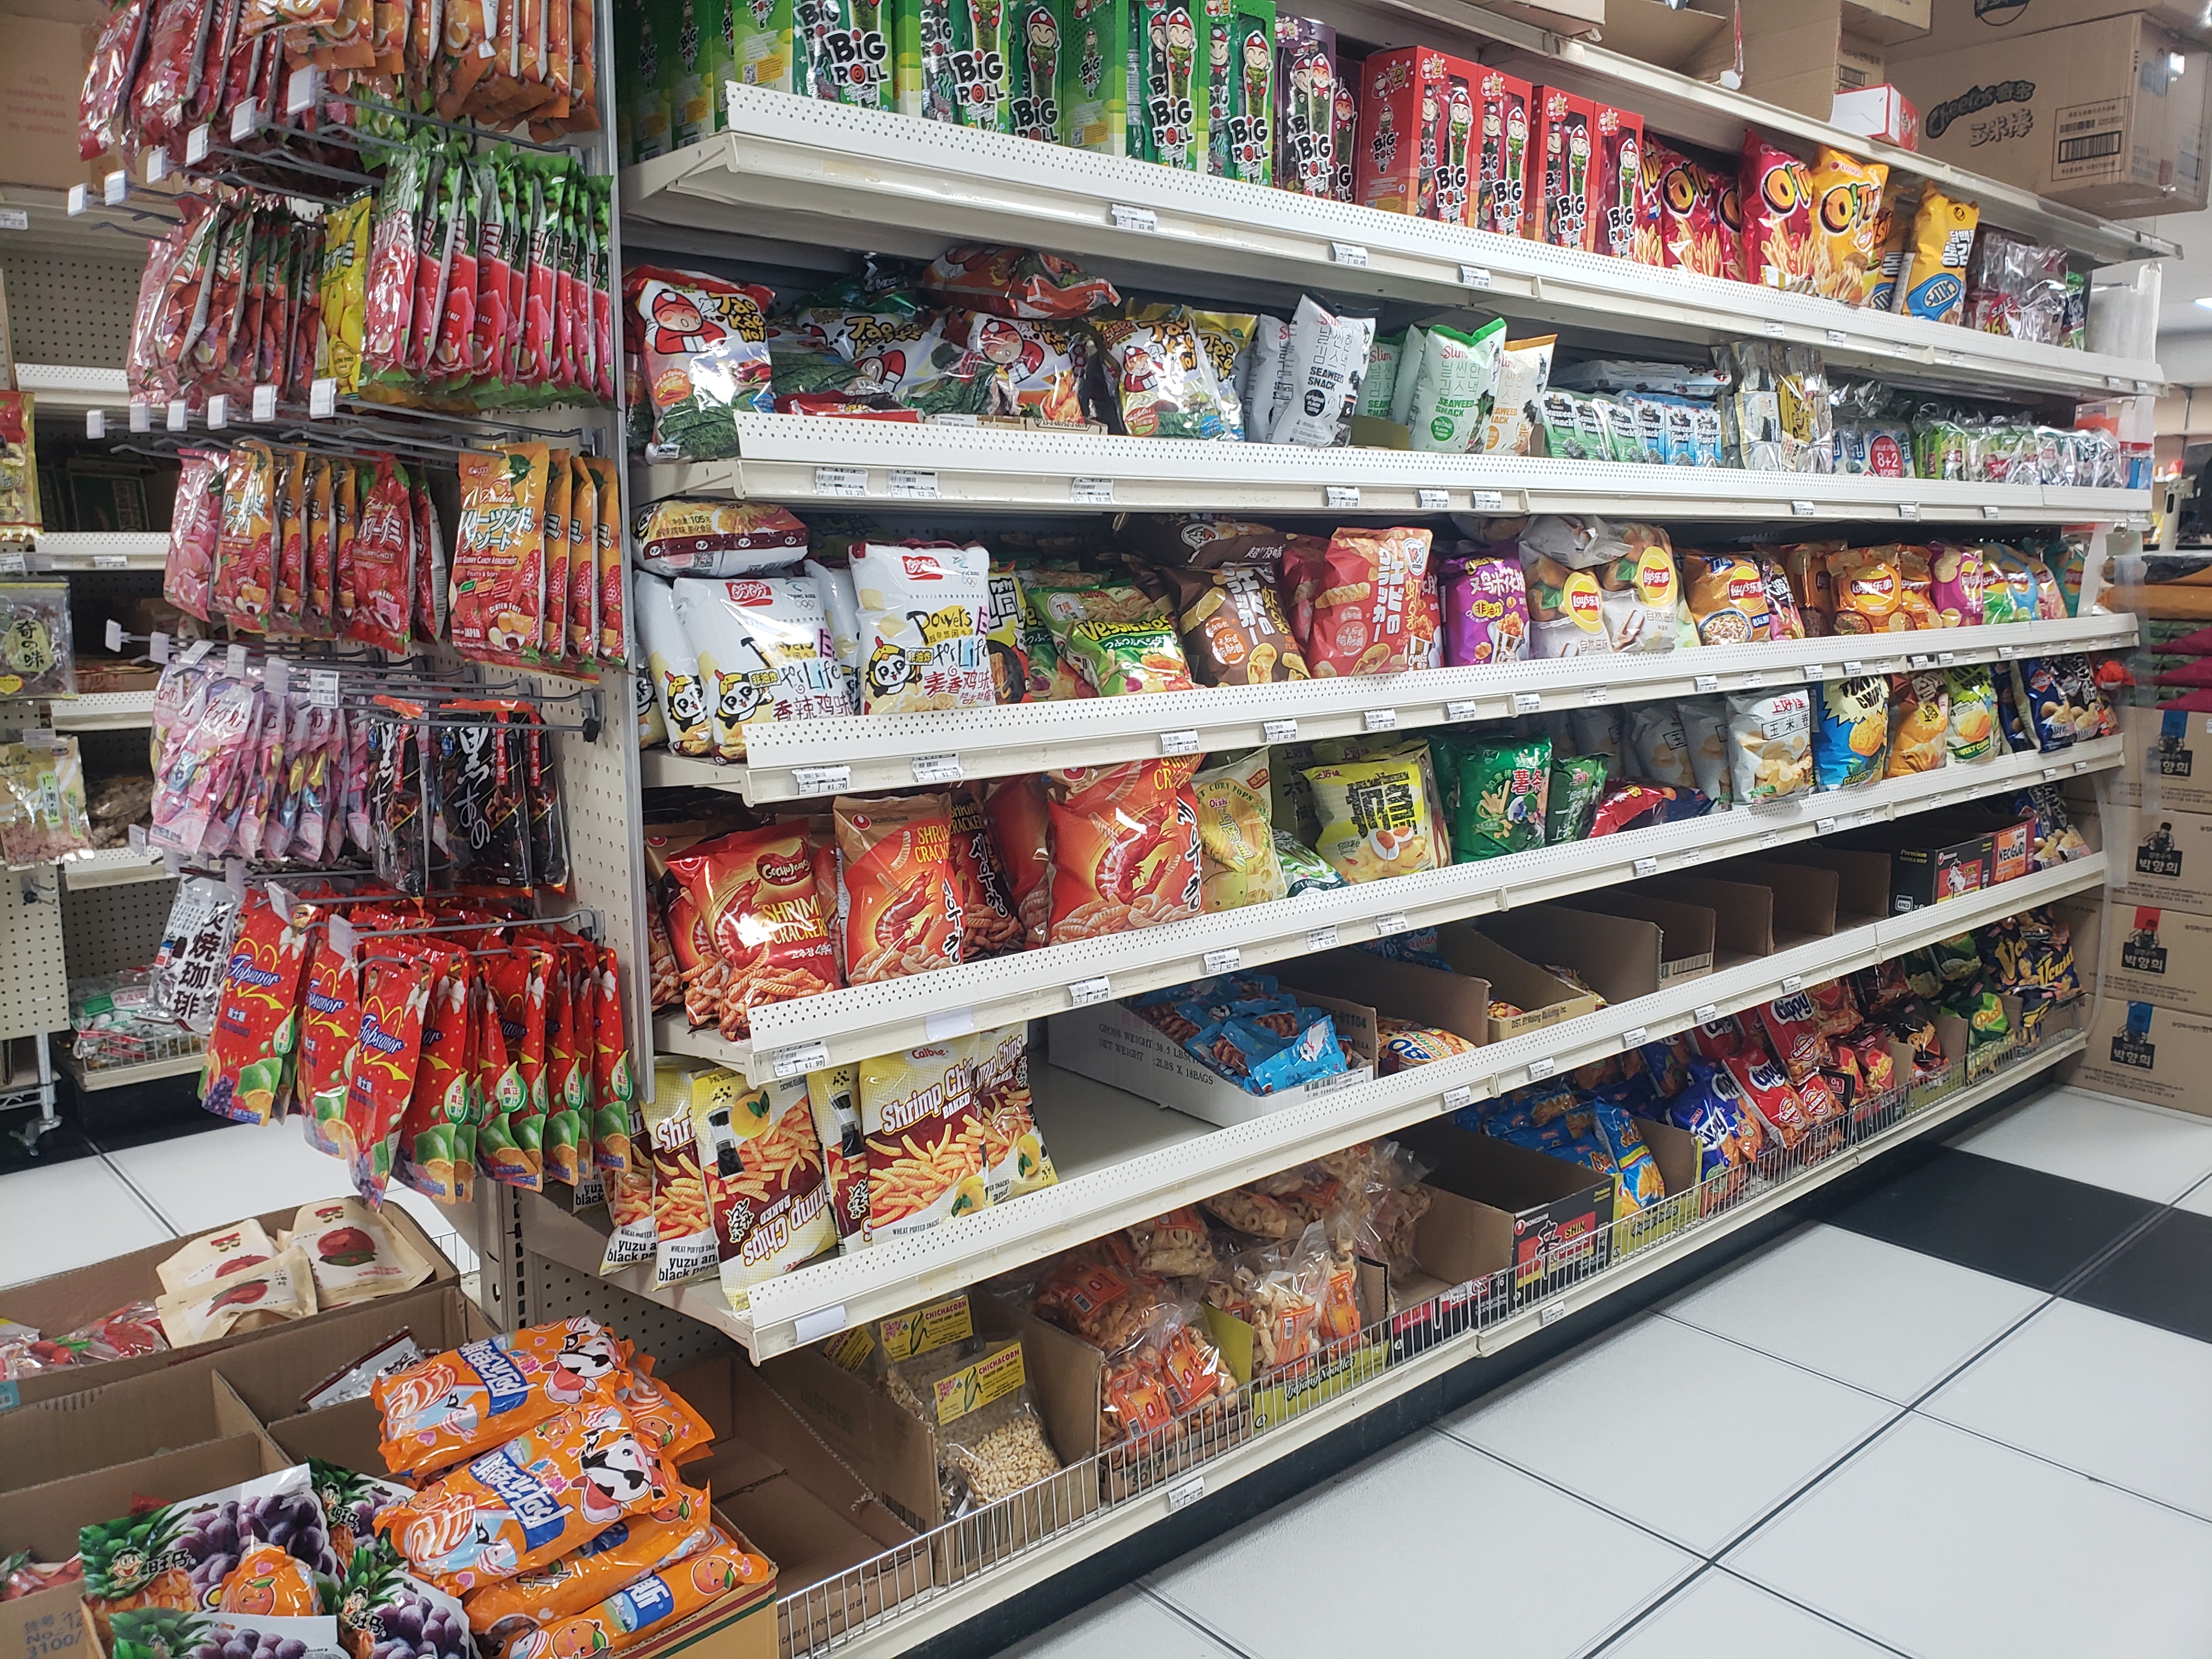 Inside Asian Supermarket, there are shelves of Asian snacks in bags. Photo by Elisabeth Paulus.